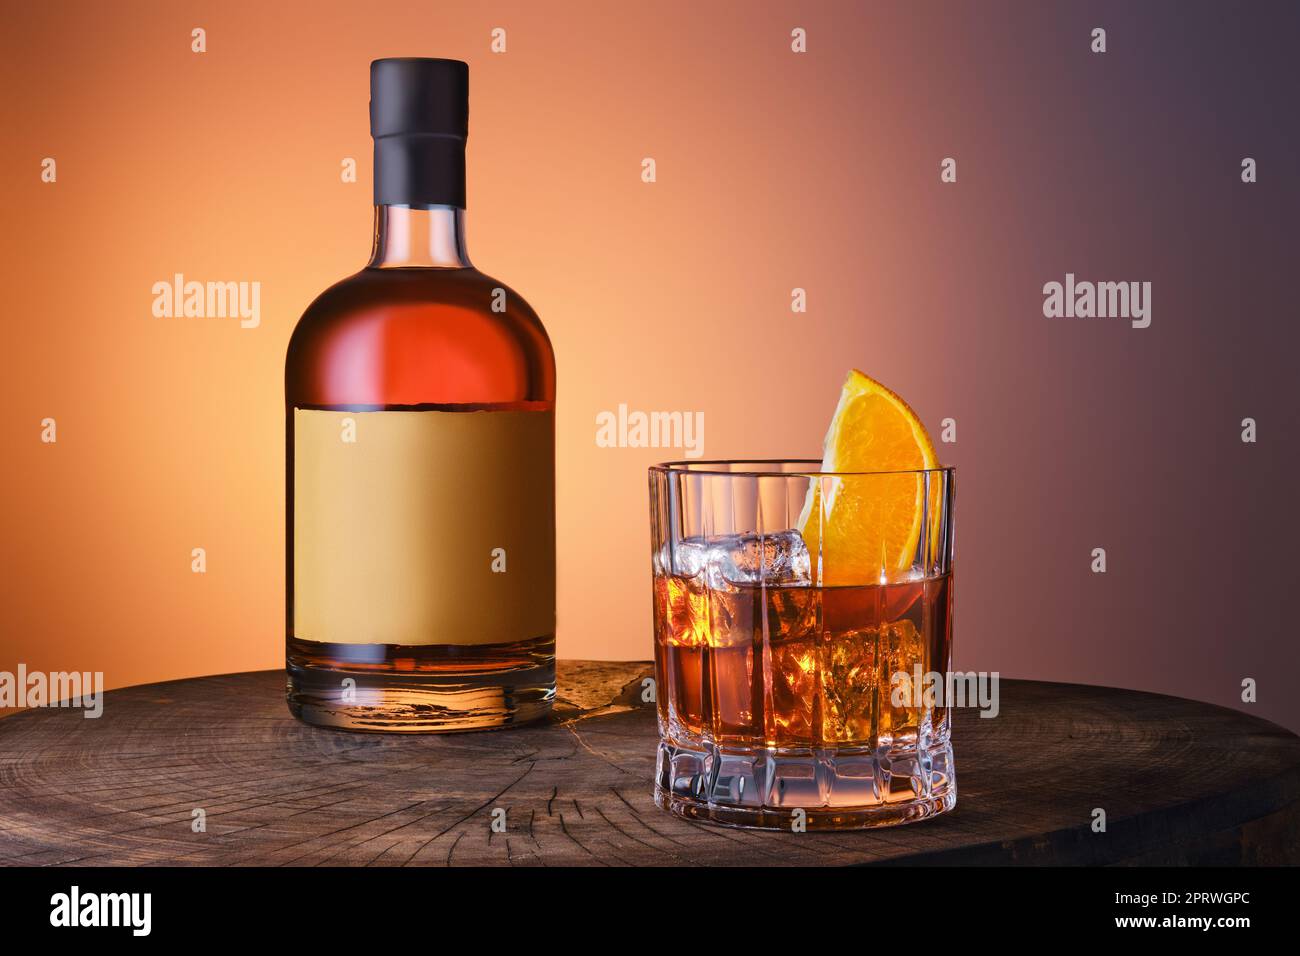 Bottle and glass with blended malt scotch whisky Stock Photo